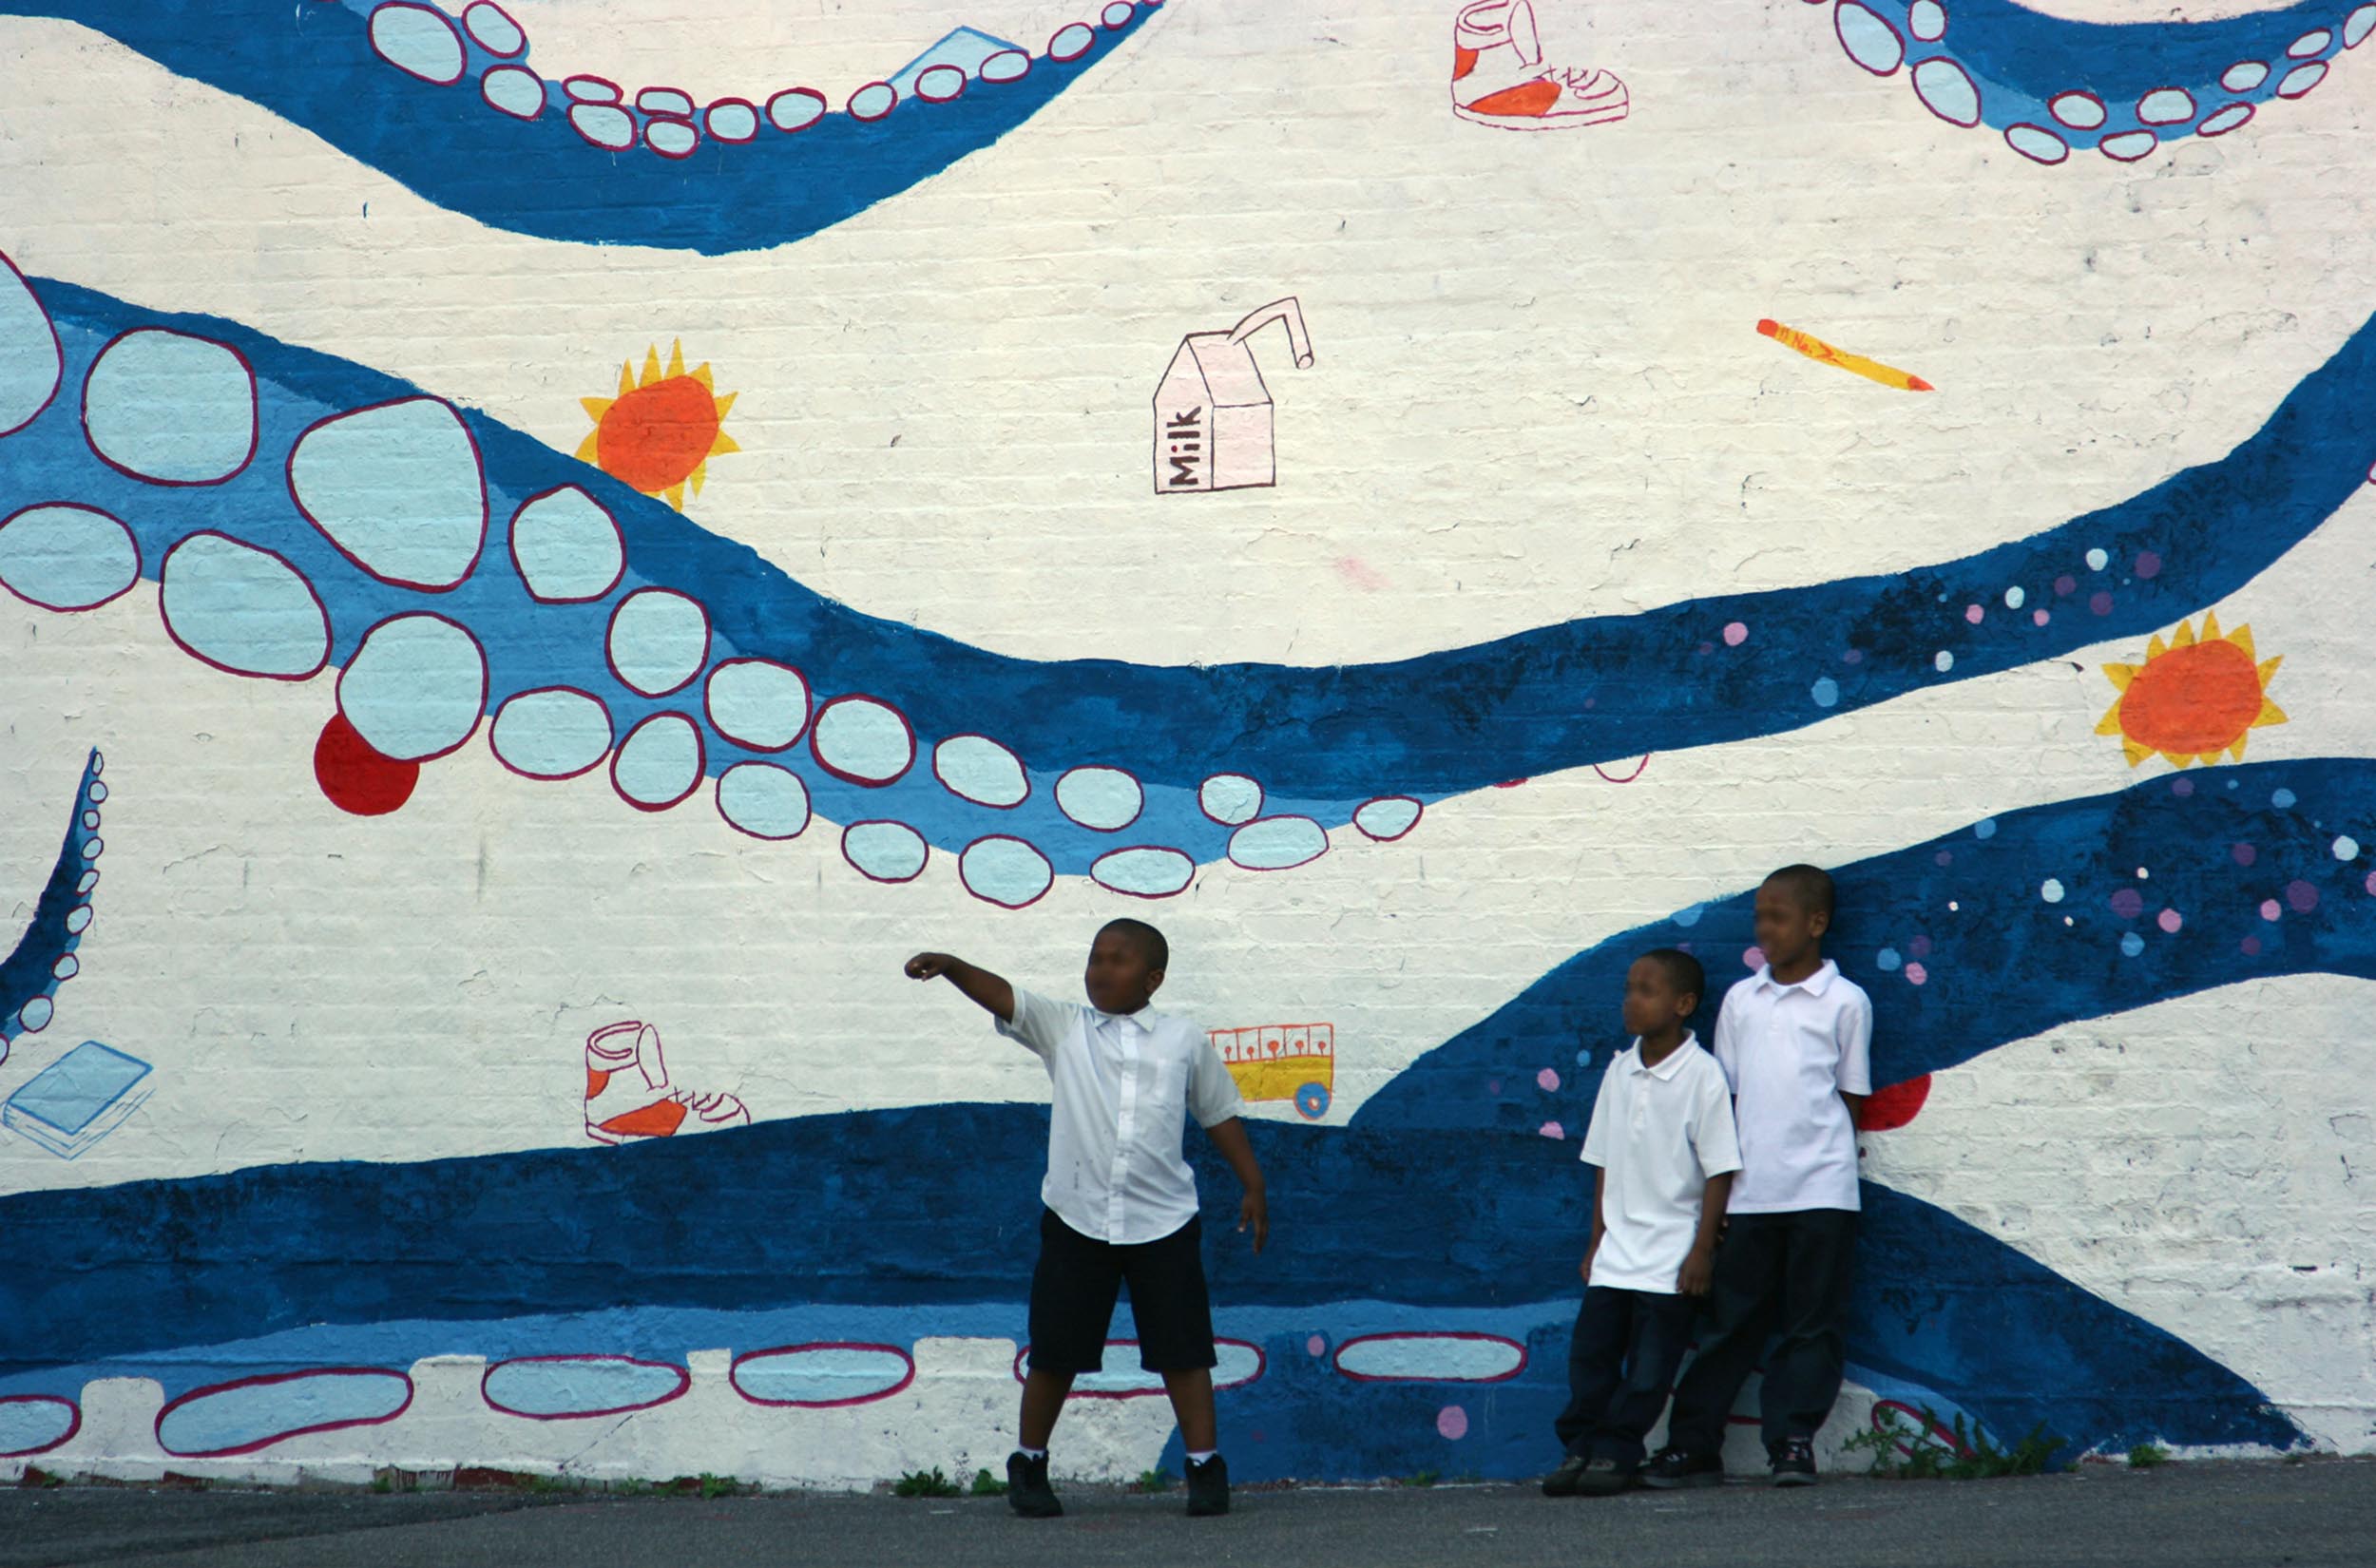 Mural detail with kids standing in front of octopus tentacles.